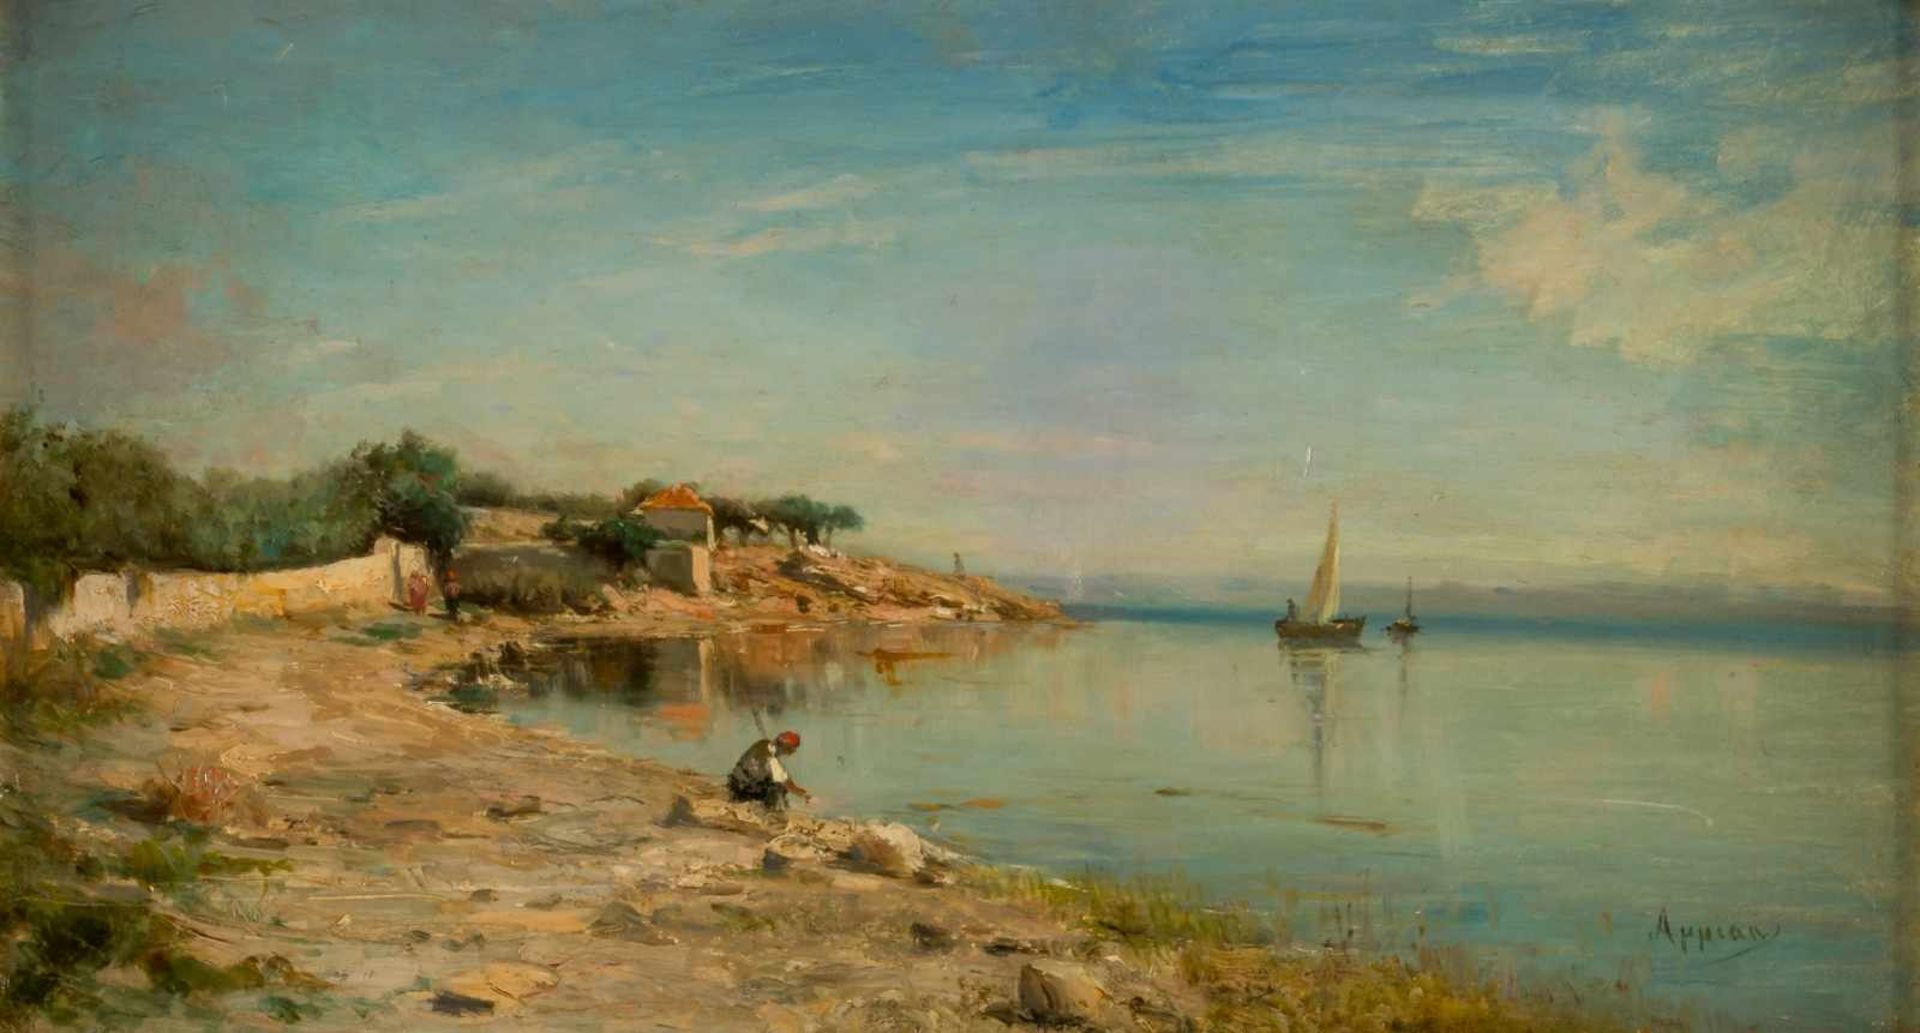 Adolphe APPIAN (1818-1898), At the lake, Oil on canvas, signed, 31 x 55 cm, frame: 45 x 69cm,